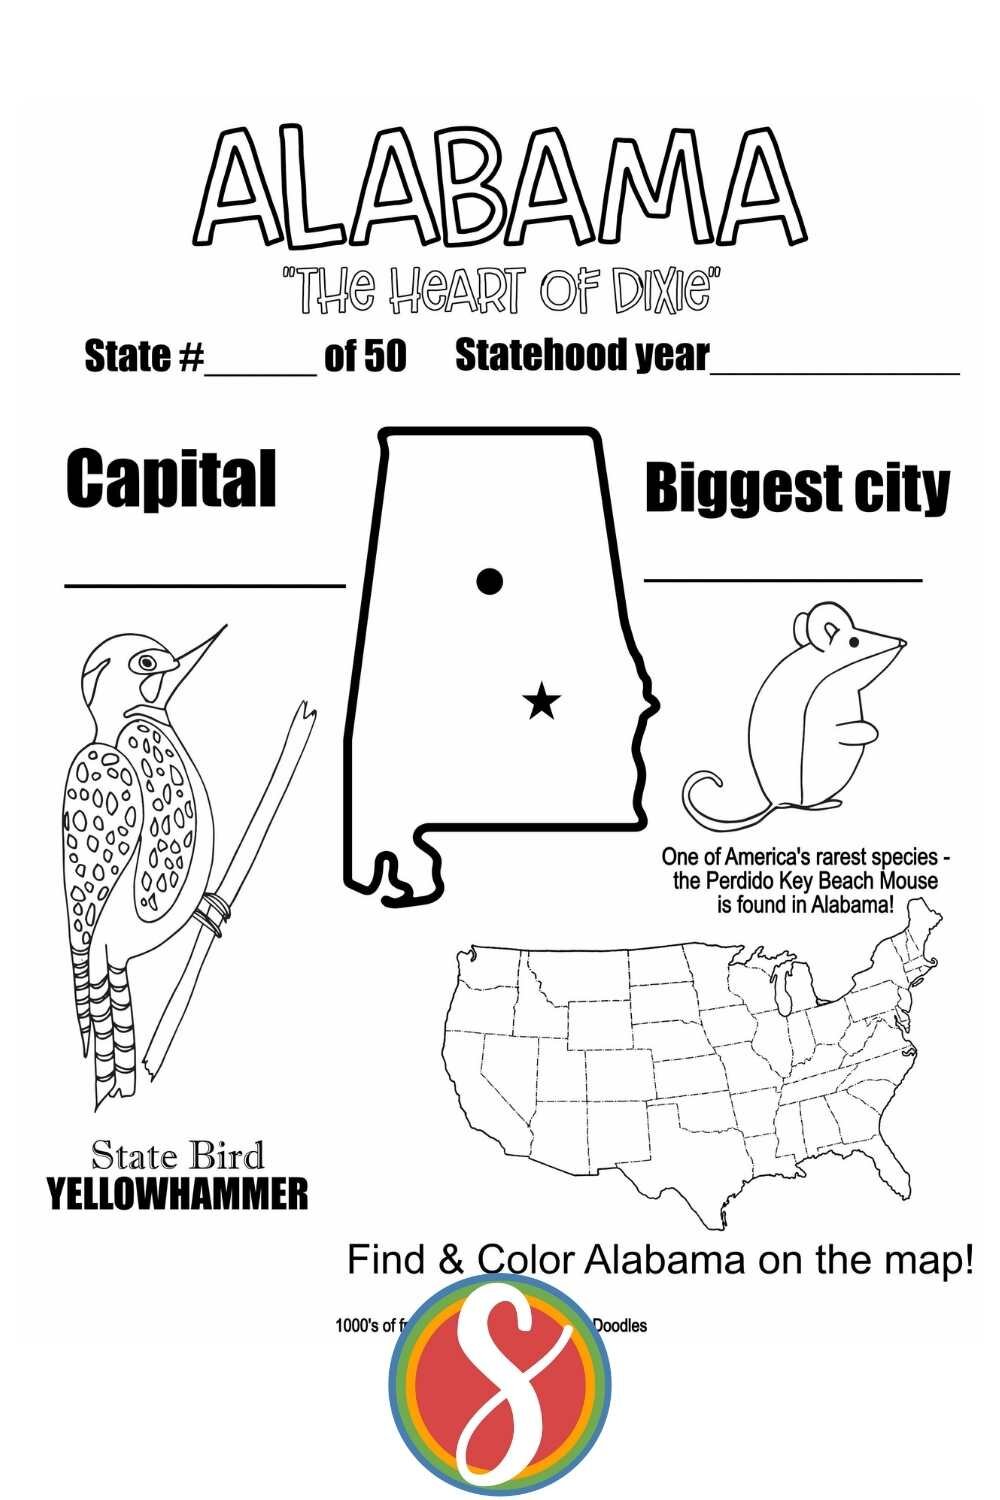 Alabama facts coloring sheet activity page from Stevie Doodles - please visit and print out these free Alabama activity pages from Stevie today!